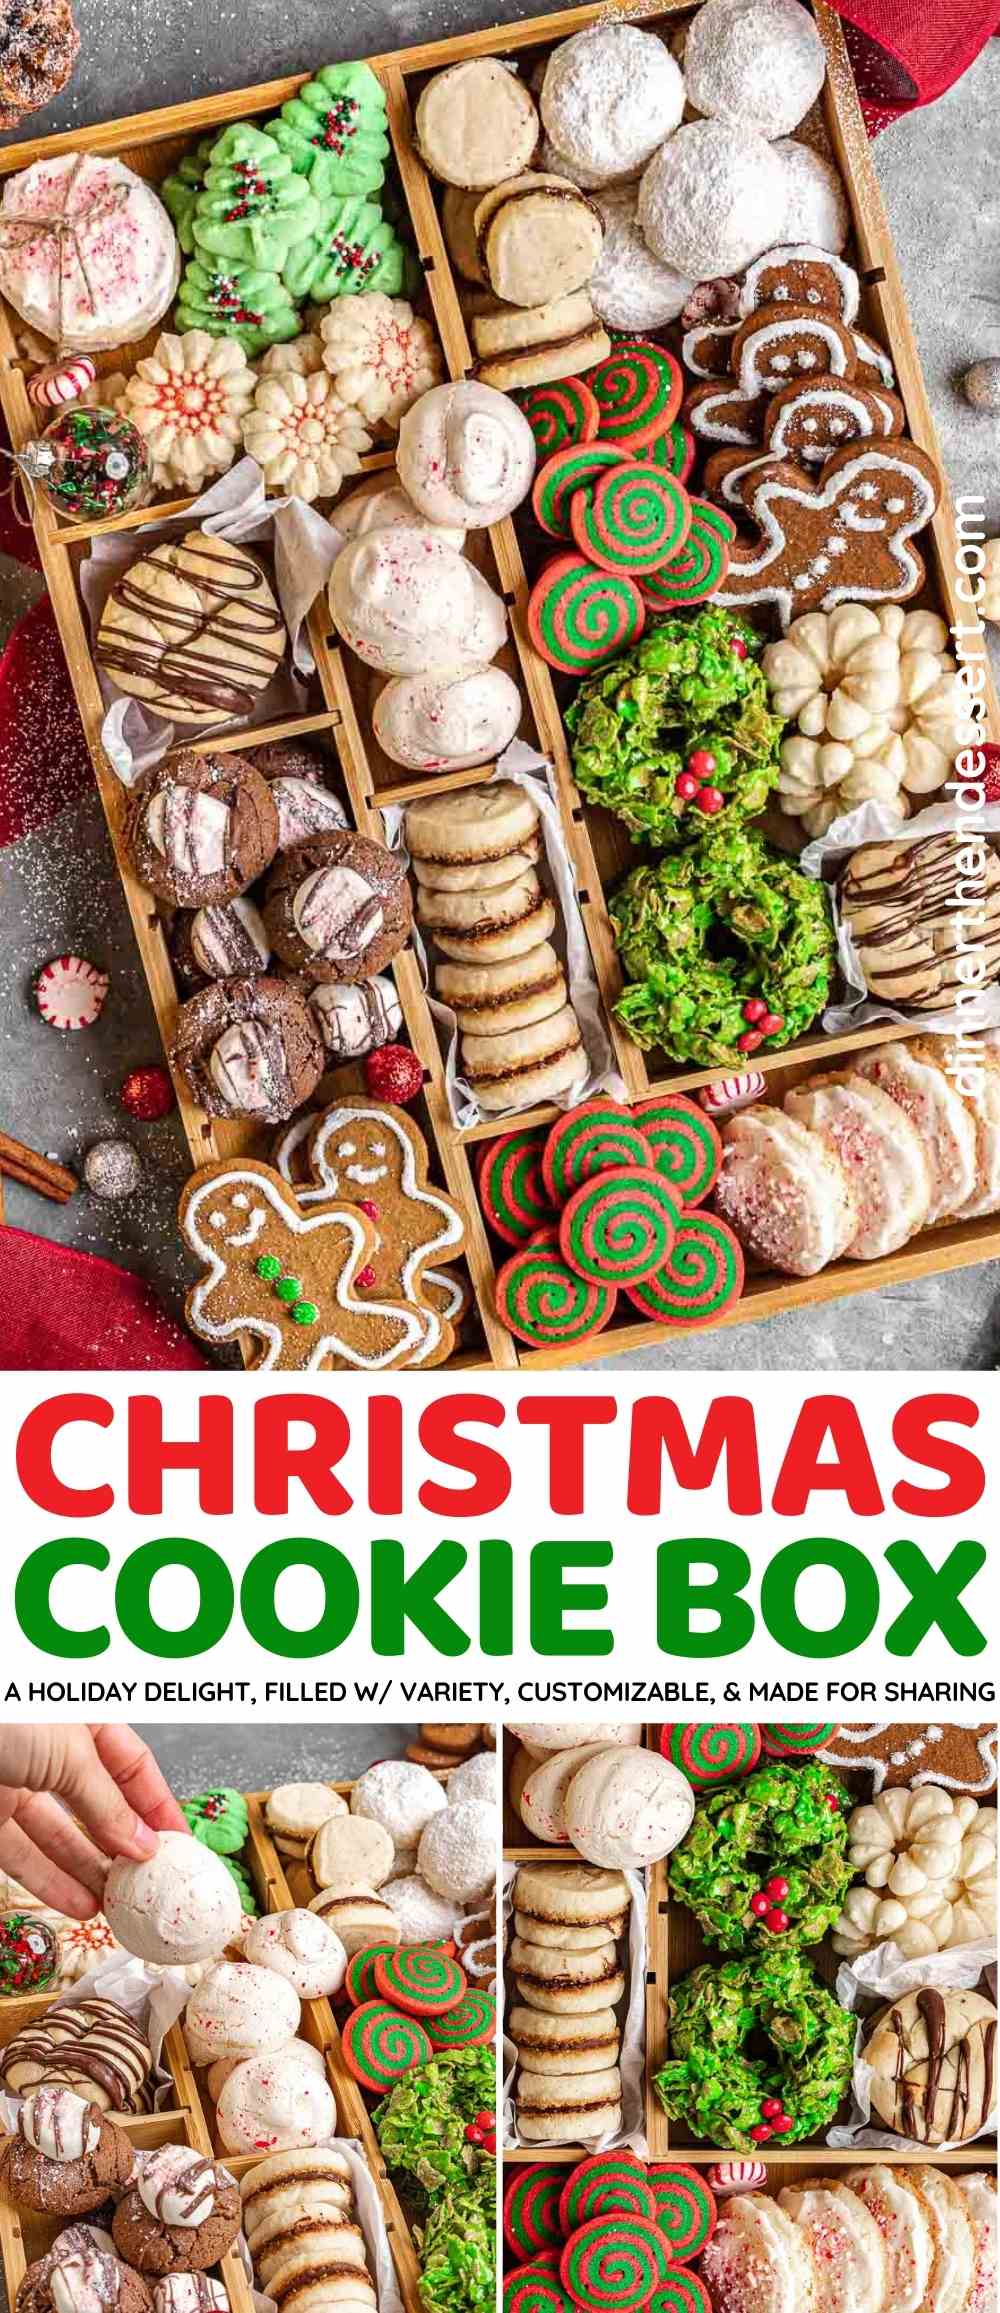 Christmas Cookie Box collage